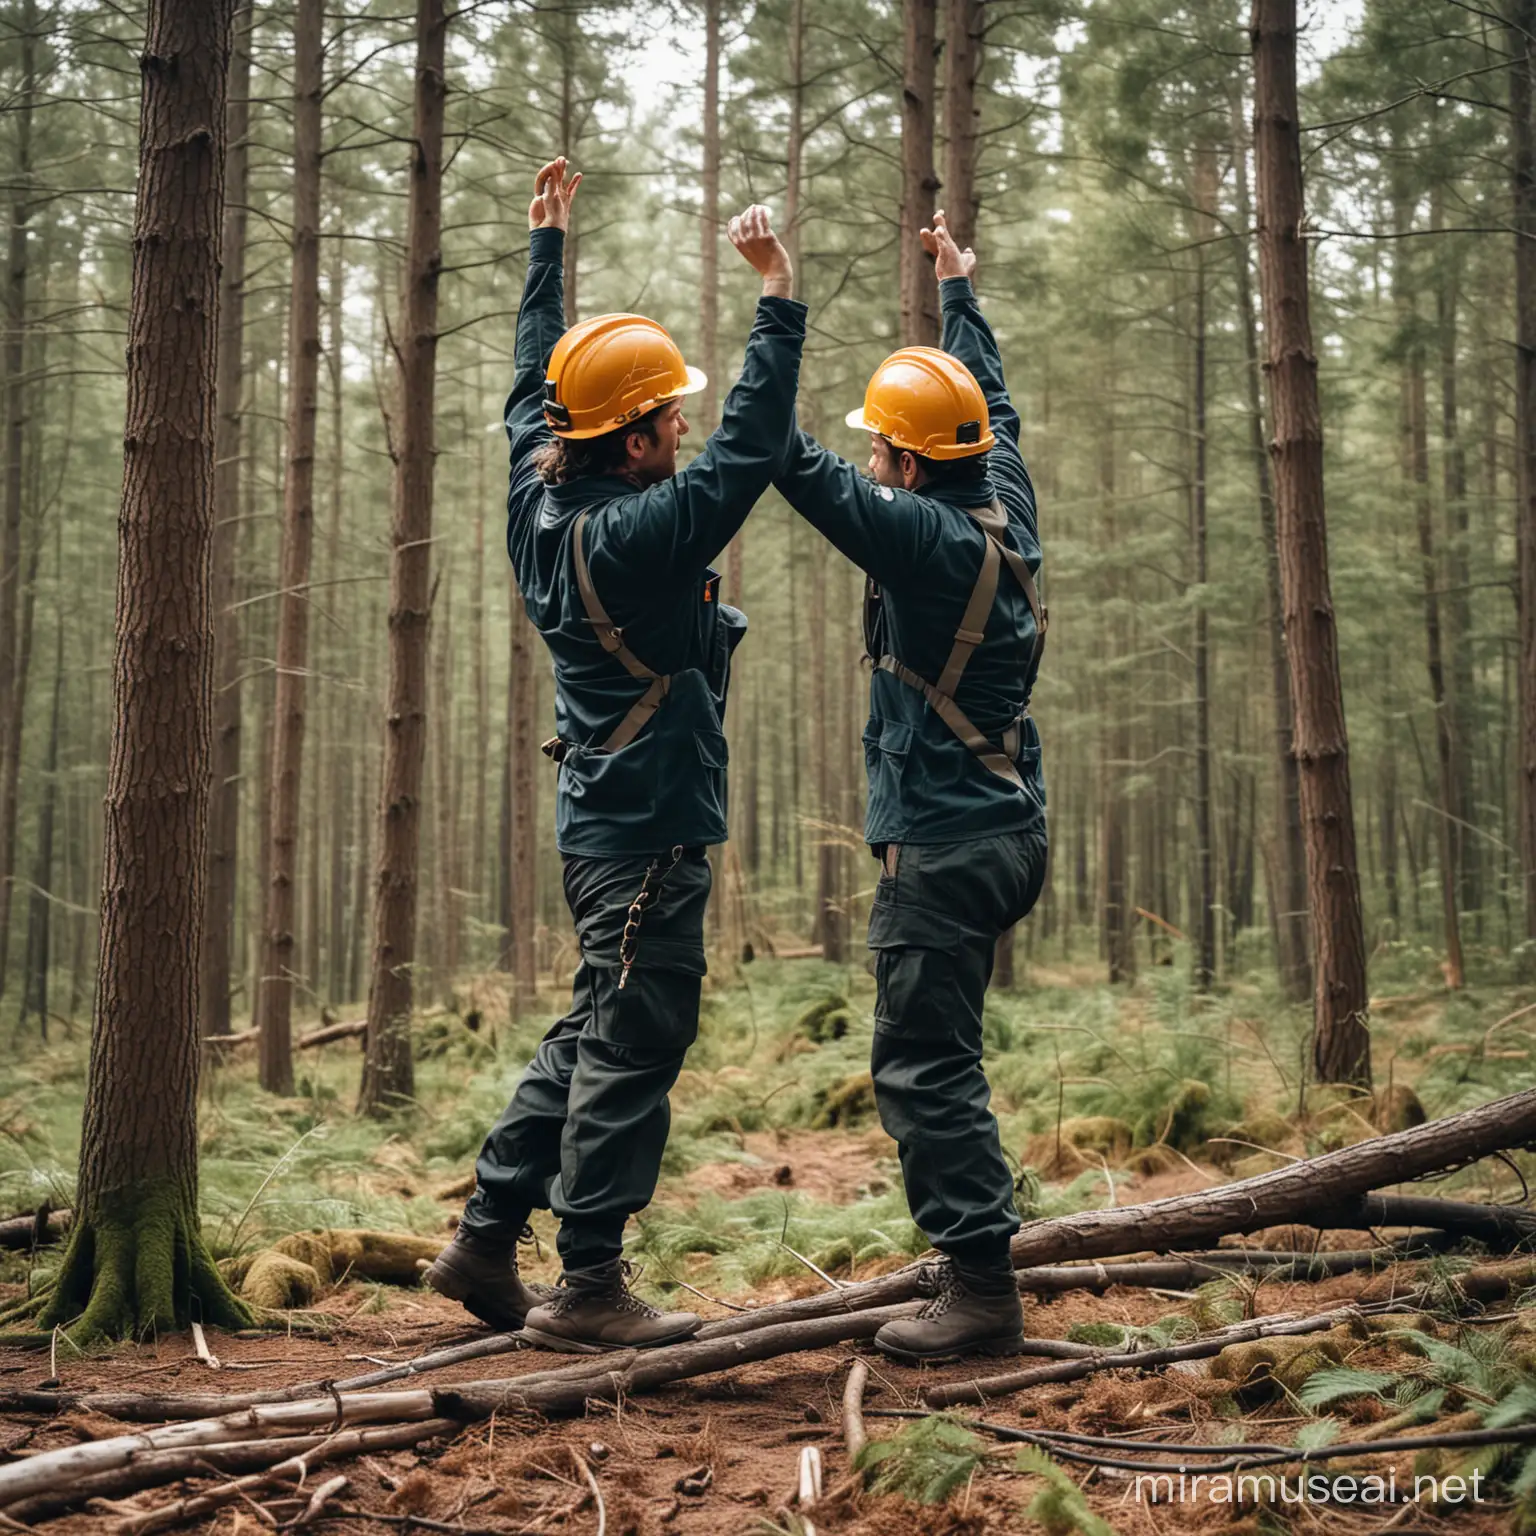 A forest worker standing with the back bent forward and twisted sideways, two hands raised in the air, two legs bent and pulling a cable attached to a leaning  tree felled in the forest.